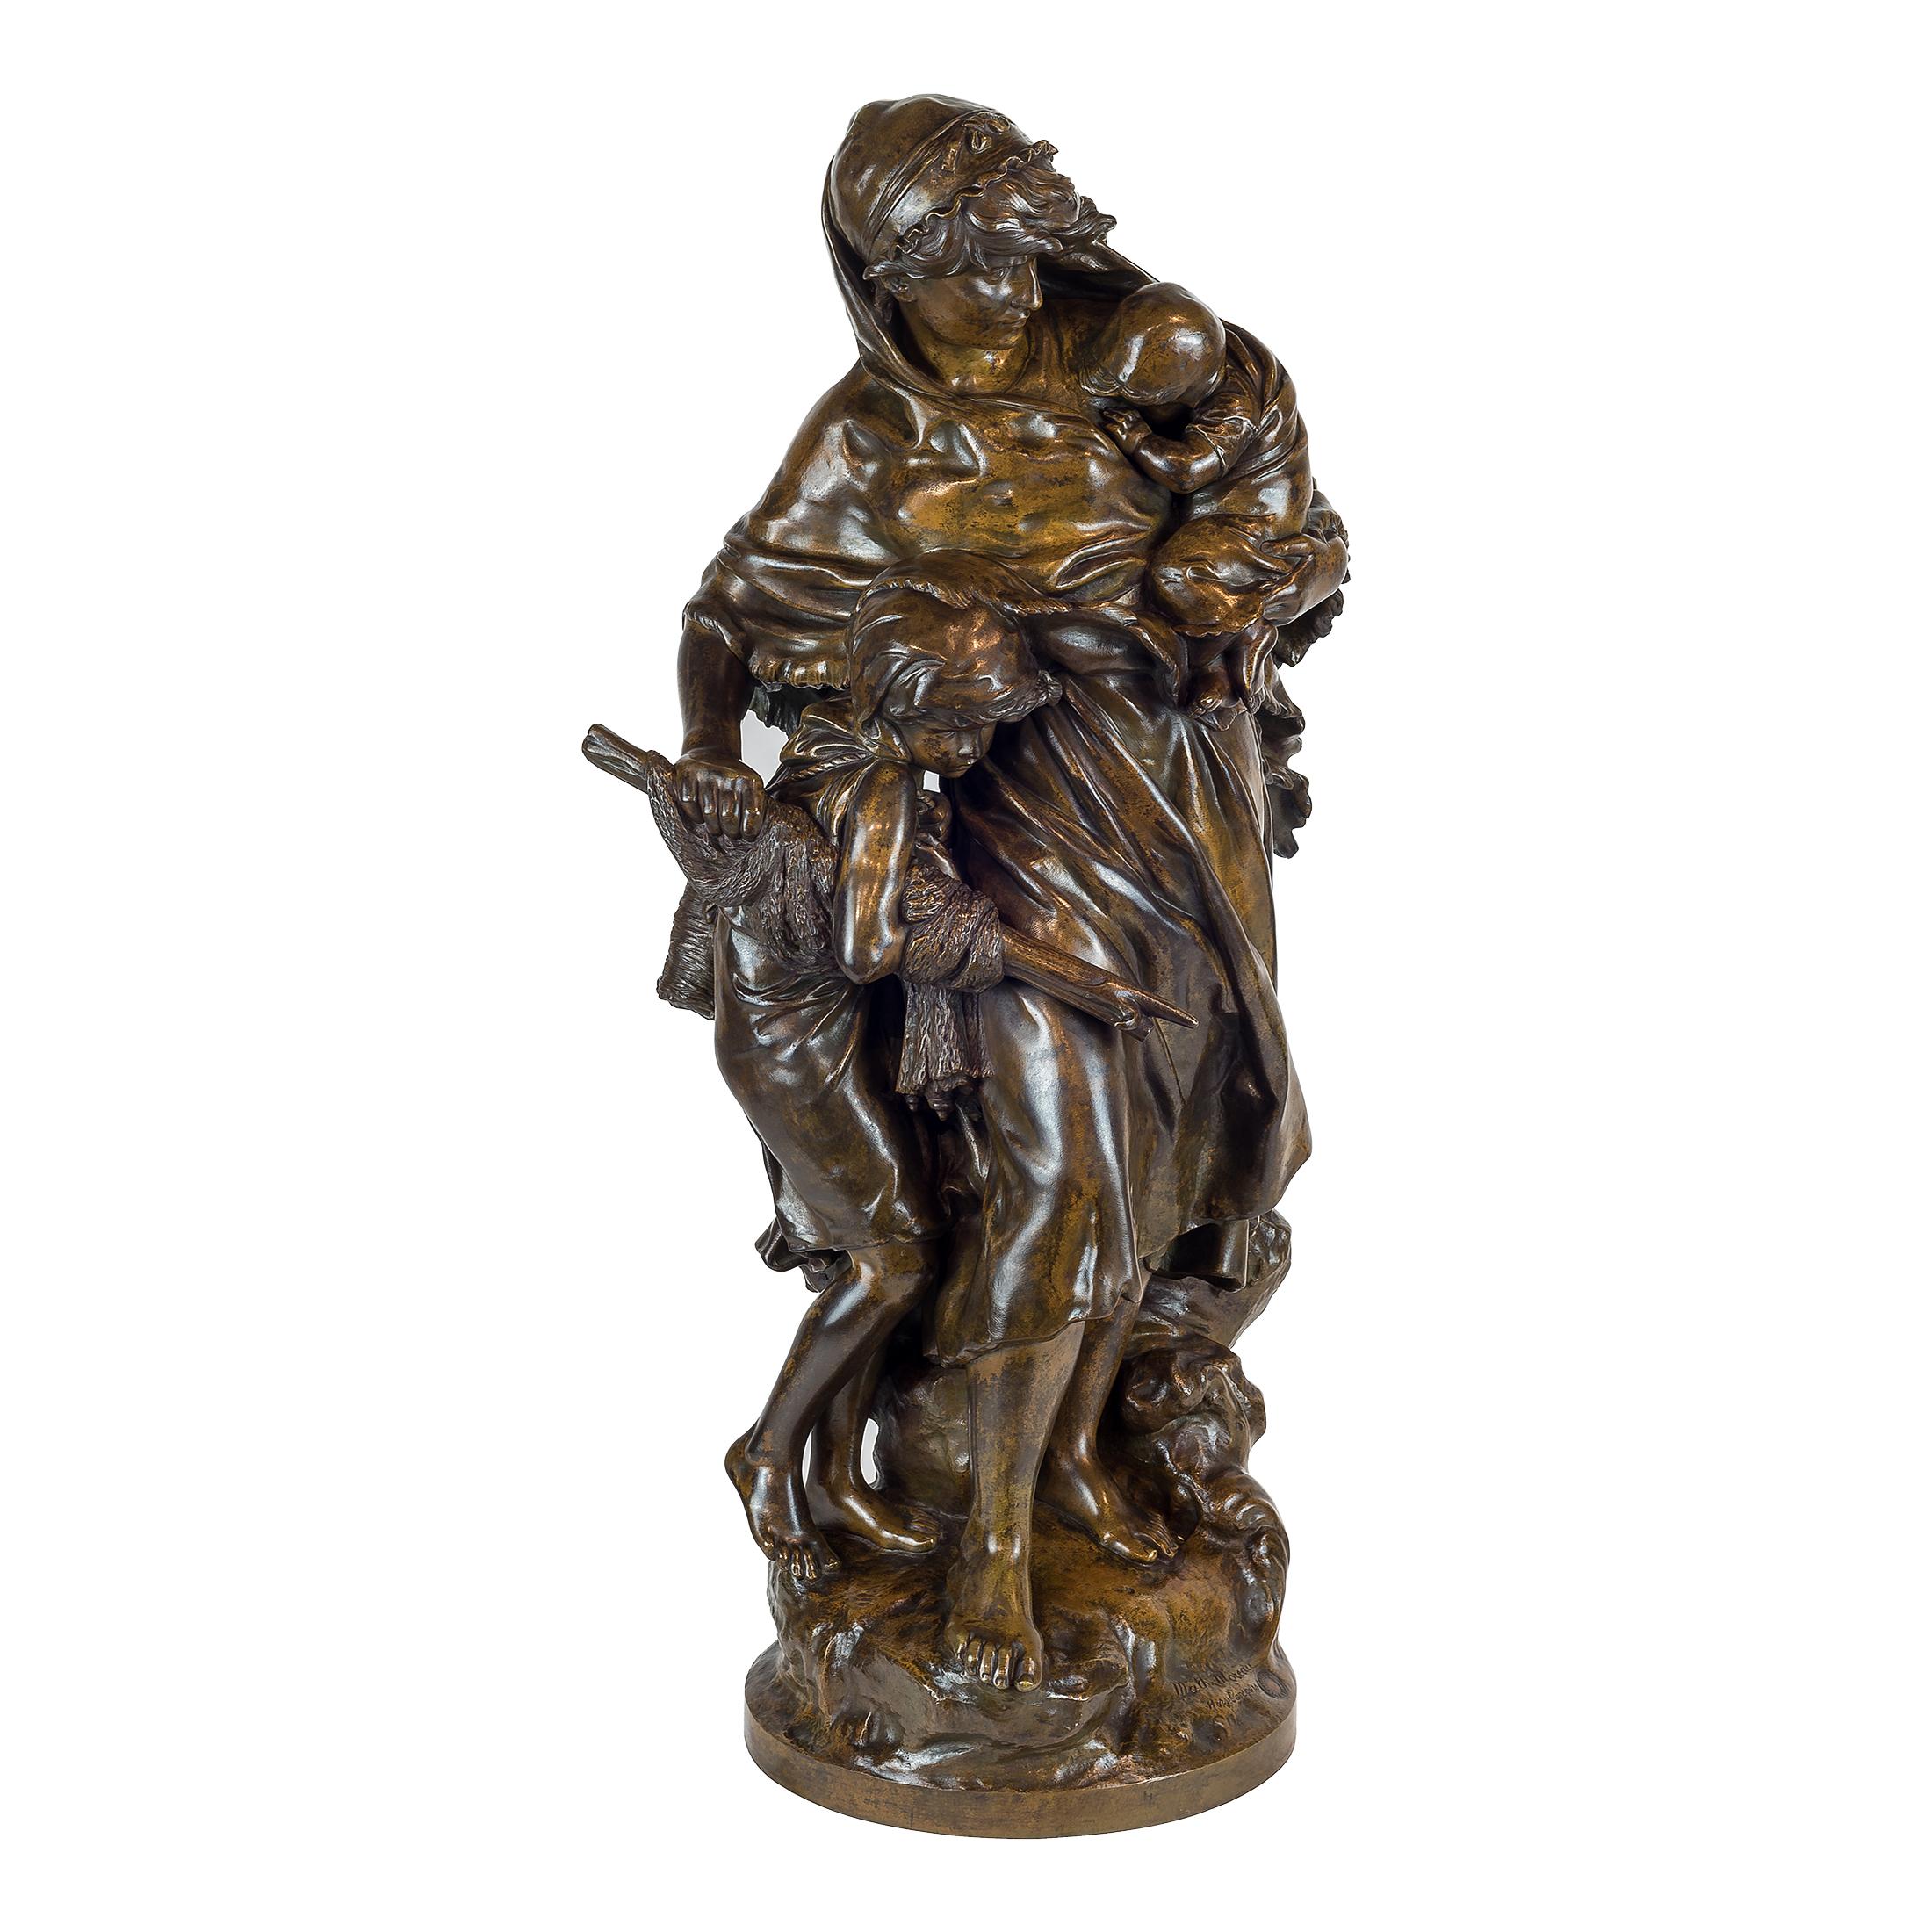 A high quality patinated bronze Sculpture by Mathurin Moreau
A bronze group figure depicting a mother carrying a small child on her left arm, a young girl with net and basket at her right side, on a rocky moulded base and circular plinth.
Signed